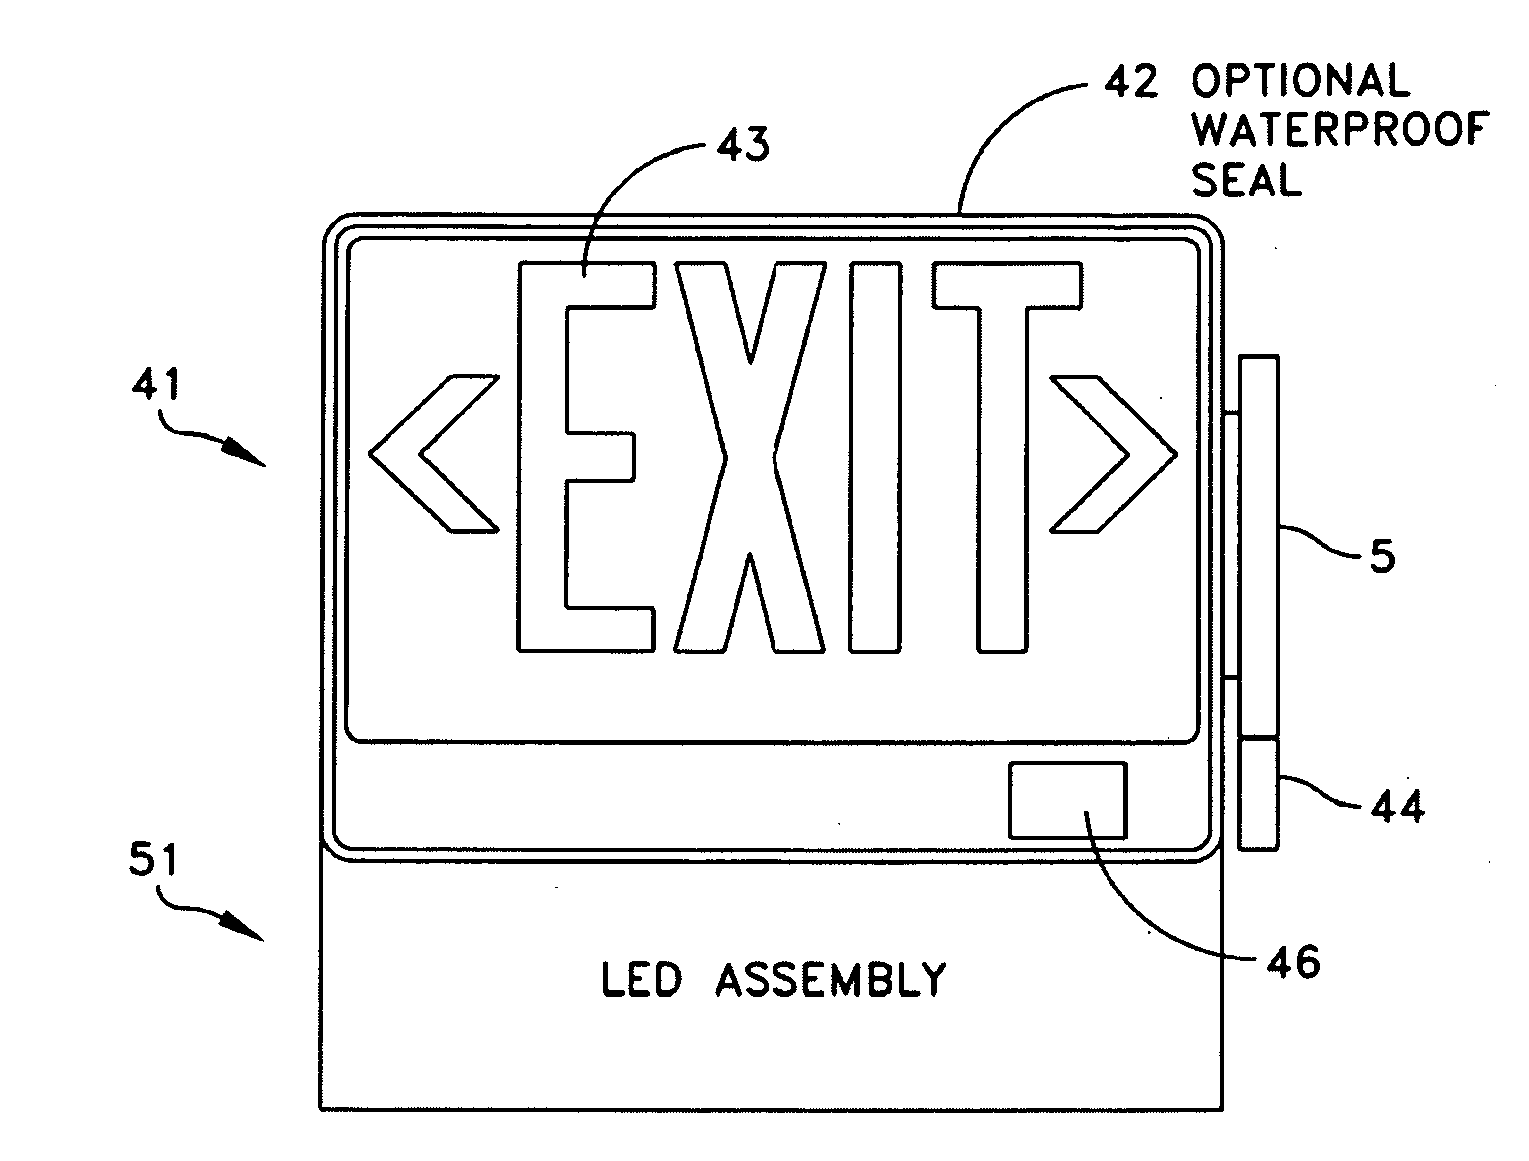 Laser lighted guidance exit indicator